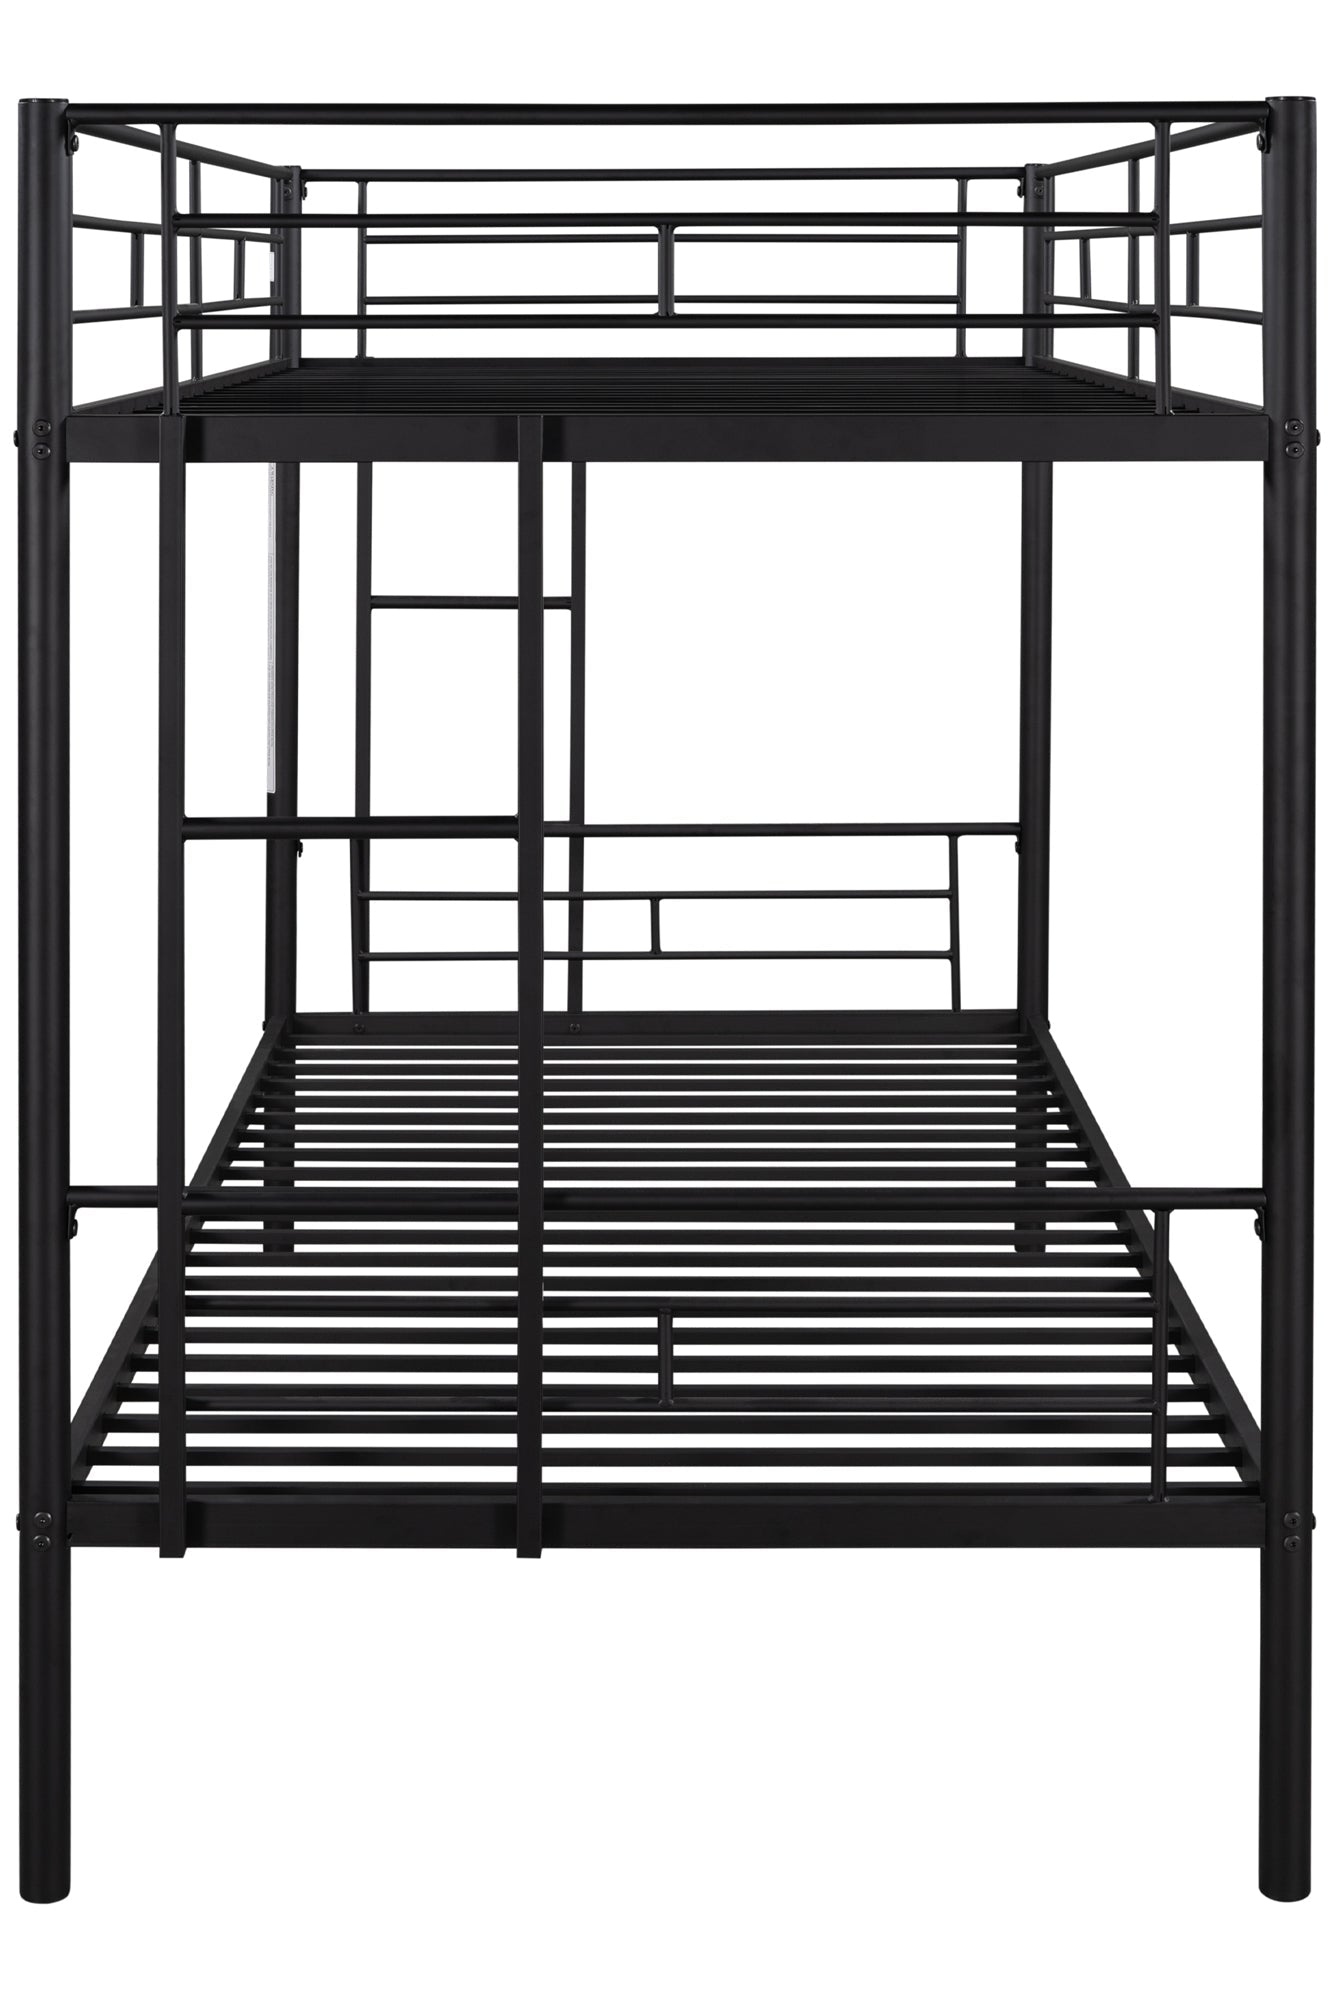 Bunk Bed with Ladder, SESSLIFE Metal Bunk Beds with Guardrail for Boys Girls Toddlers, Black Twin Over Twin Bunk Bed, Kids Bunk Bed for Home Children’s Room, TE838